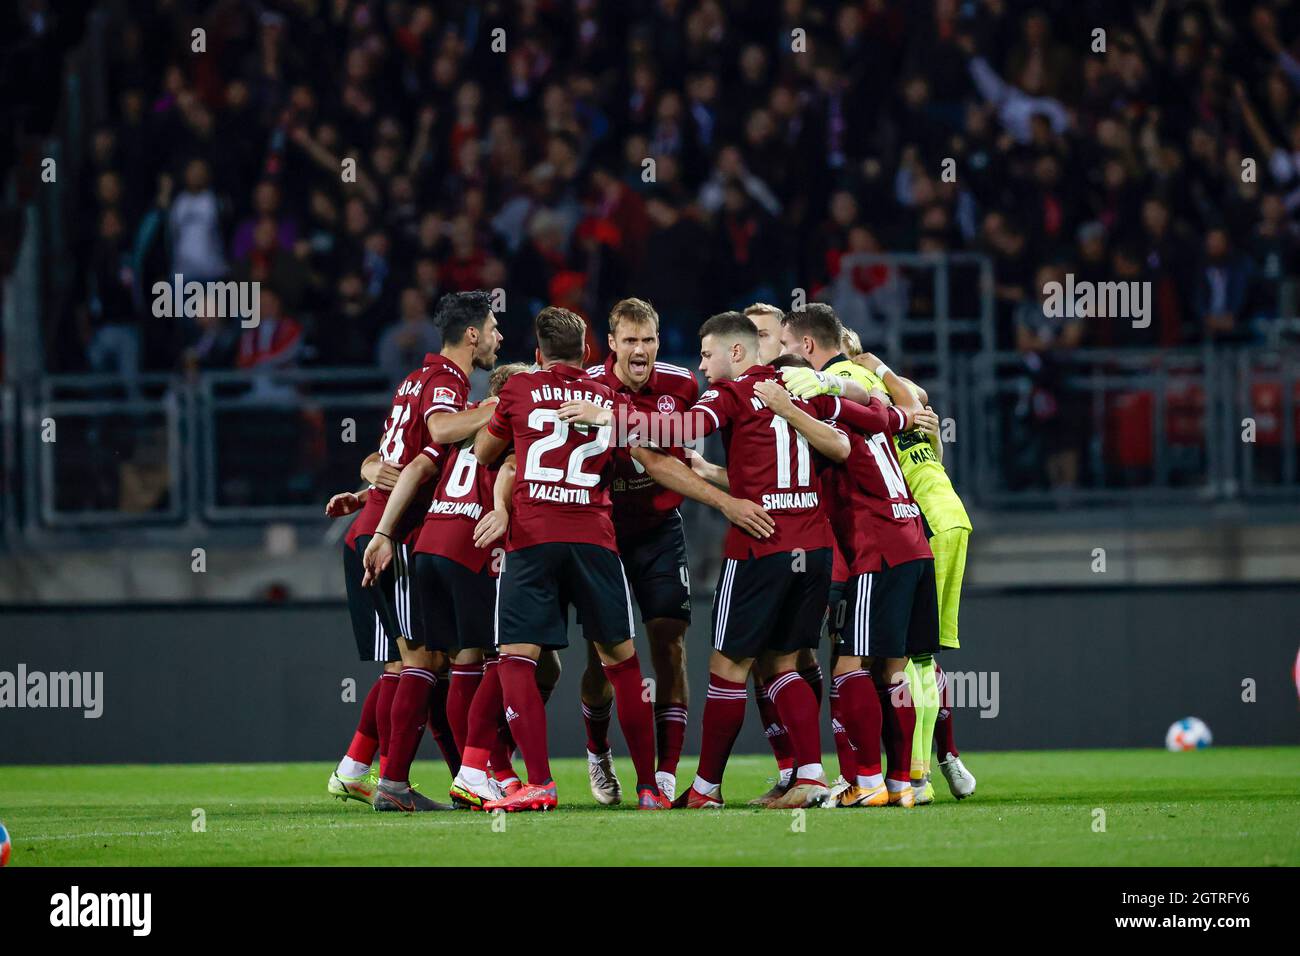 Nuremberg, Germany. 02nd Oct, 2021. Football: 2nd Bundesliga, 1st FC Nuremberg - Hannover 96, Matchday 9, Max Morlock Stadium. Nuremberg's Asger Sörensen (center) cheers on his teammates before kickoff. Credit: Löb Daniel/dpa - IMPORTANT NOTE: In accordance with the regulations of the DFL Deutsche Fußball Liga and/or the DFB Deutscher Fußball-Bund, it is prohibited to use or have used photographs taken in the stadium and/or of the match in the form of sequence pictures and/or video-like photo series./dpa/Alamy Live News Stock Photo